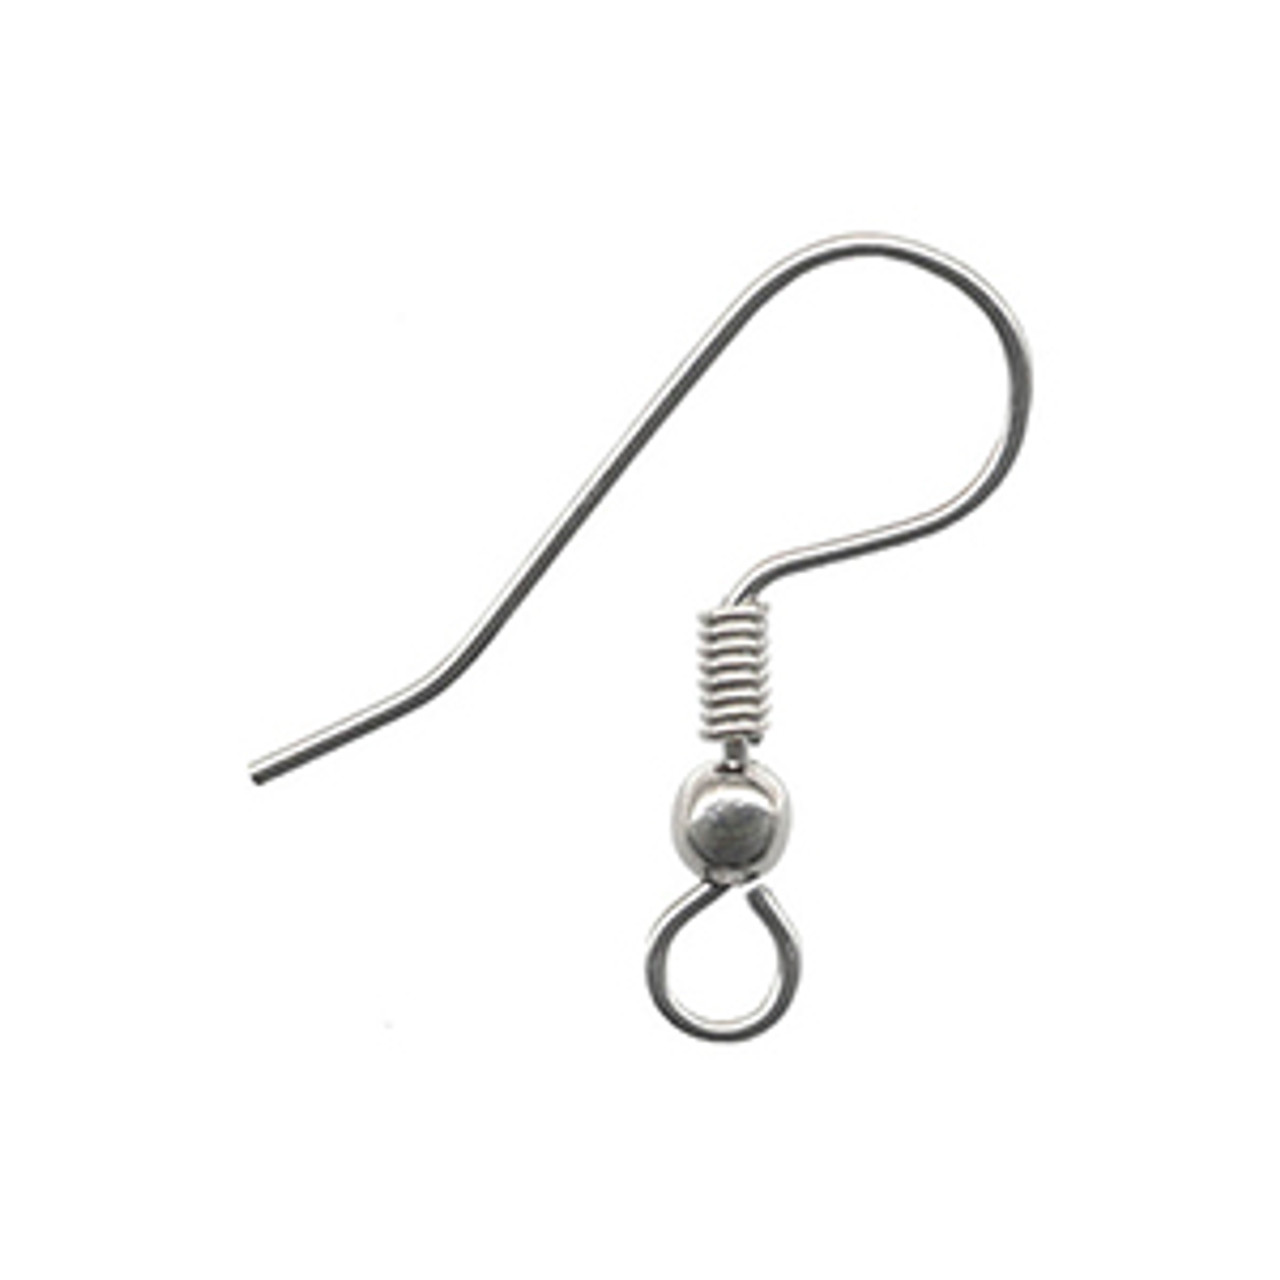 Stainless Steel Ear Wires ~ French Hooks with Ball + Coil ~Large 7mm end  Loop